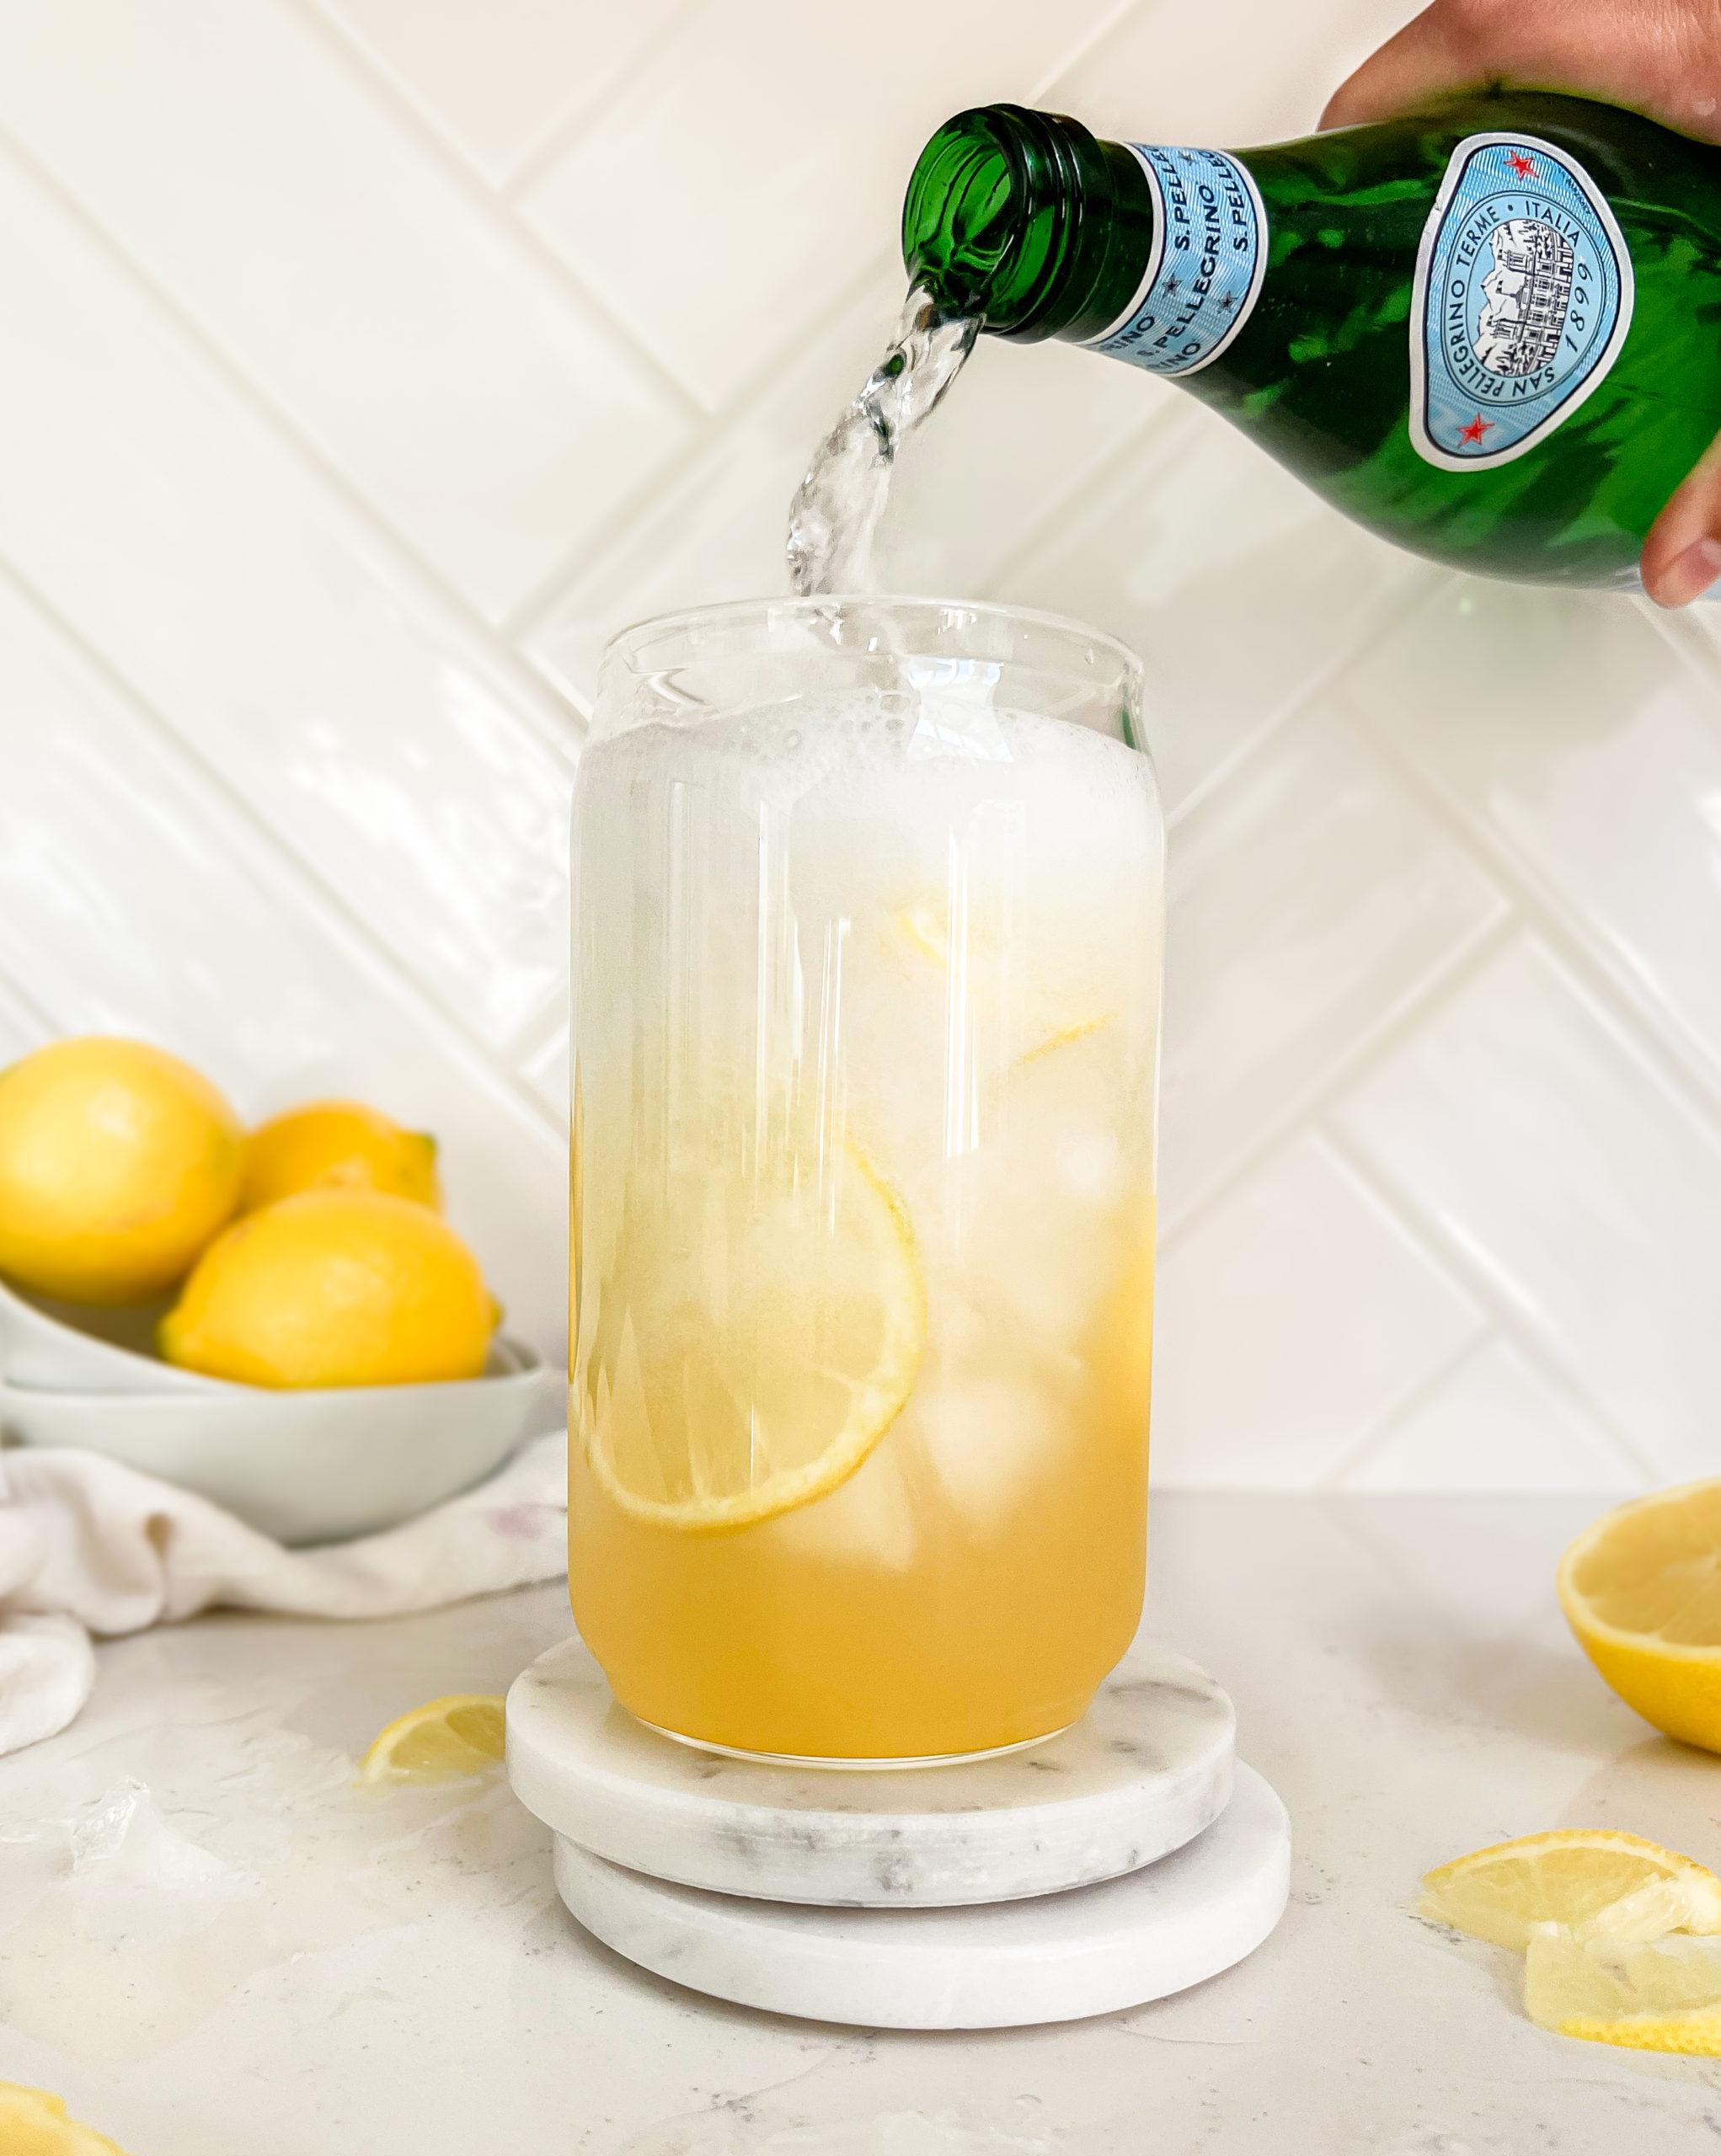 sparkling water poured into a glass of lemonade